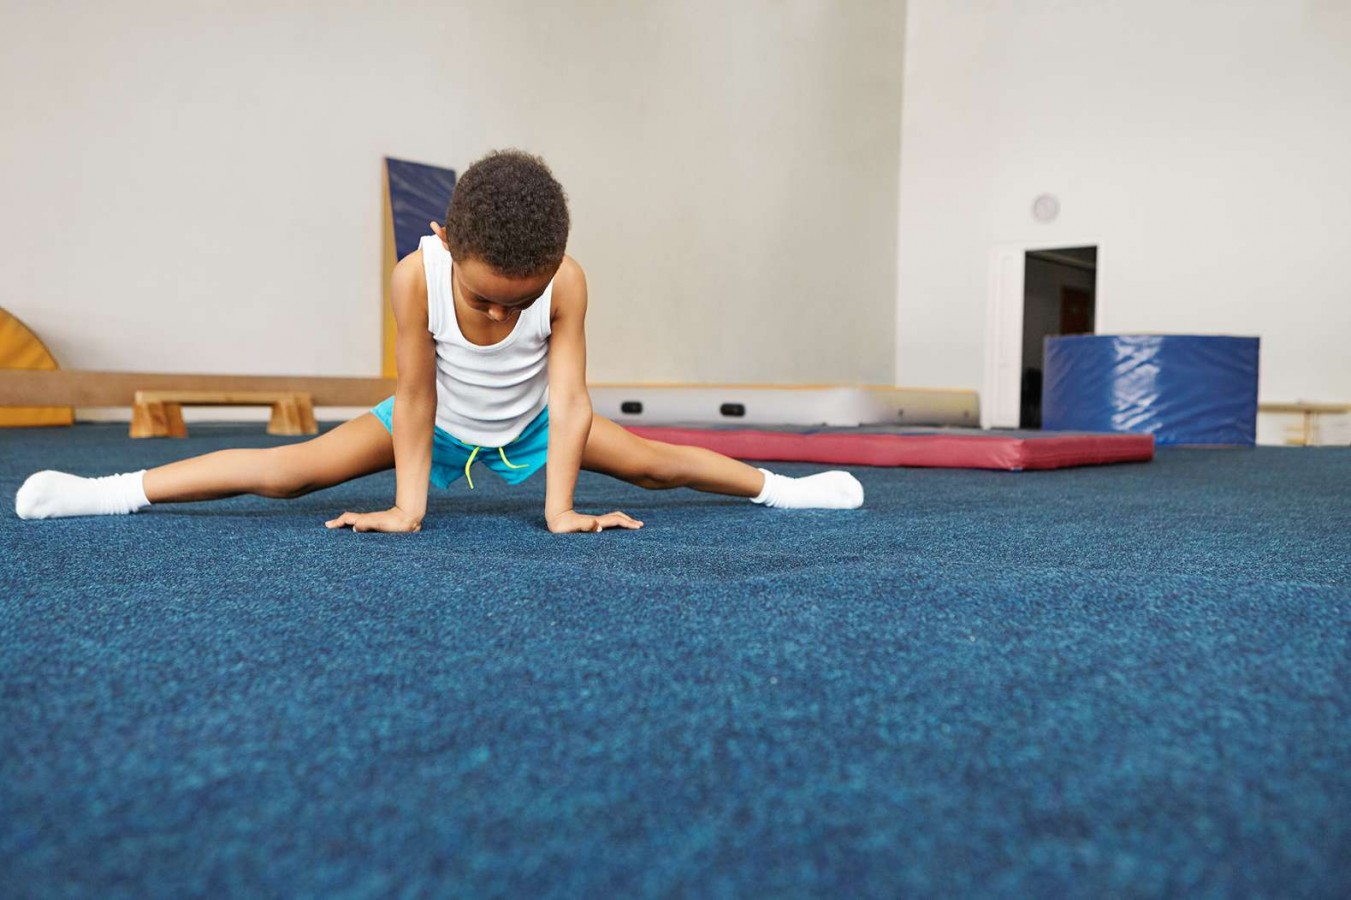  10 CrossFit Workouts for Kids to Develop a Strong and Healthy Body